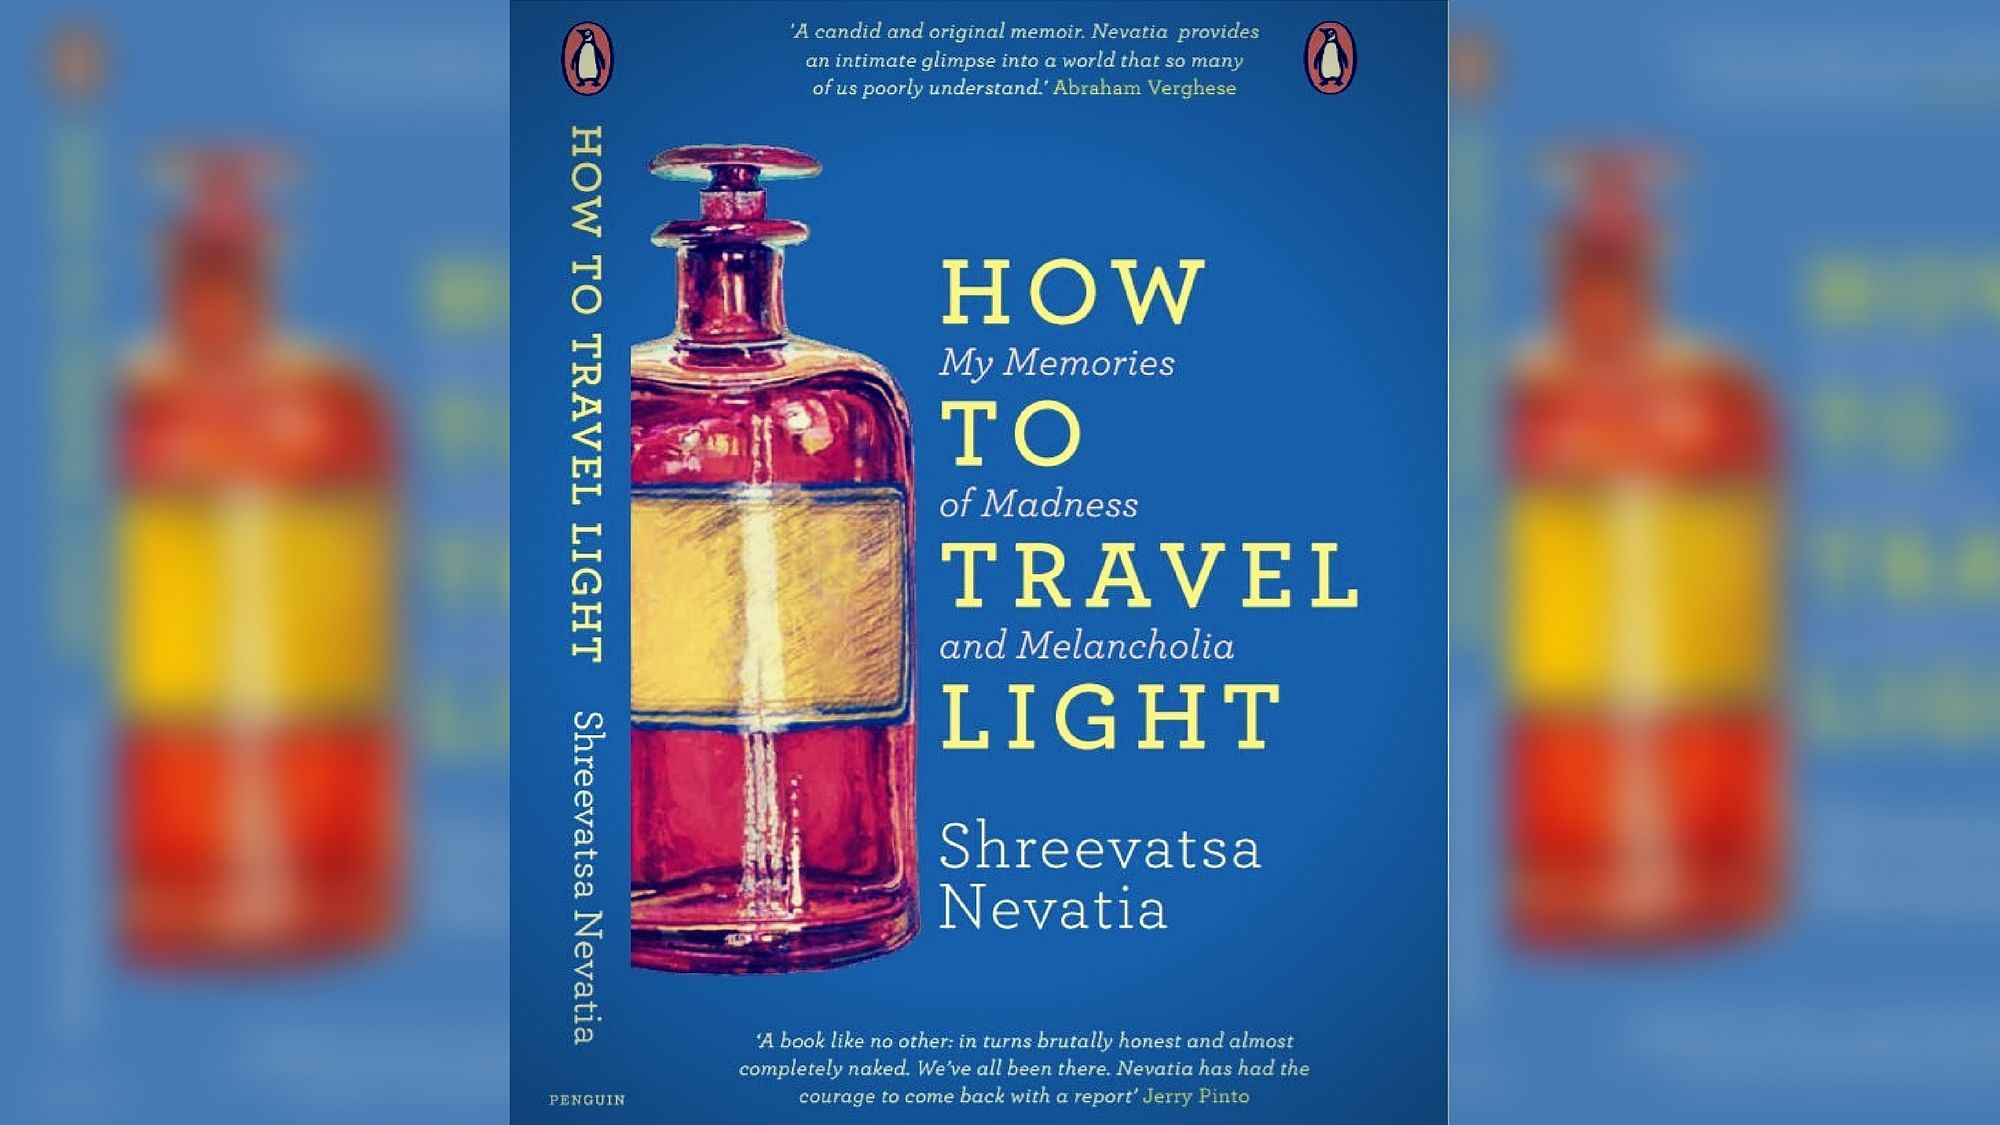 How to Travel Light: My Memories of Madness and Melancholia is journalist-editor Shreevatsa Nevatia’s roller coaster journey through depression and mania.